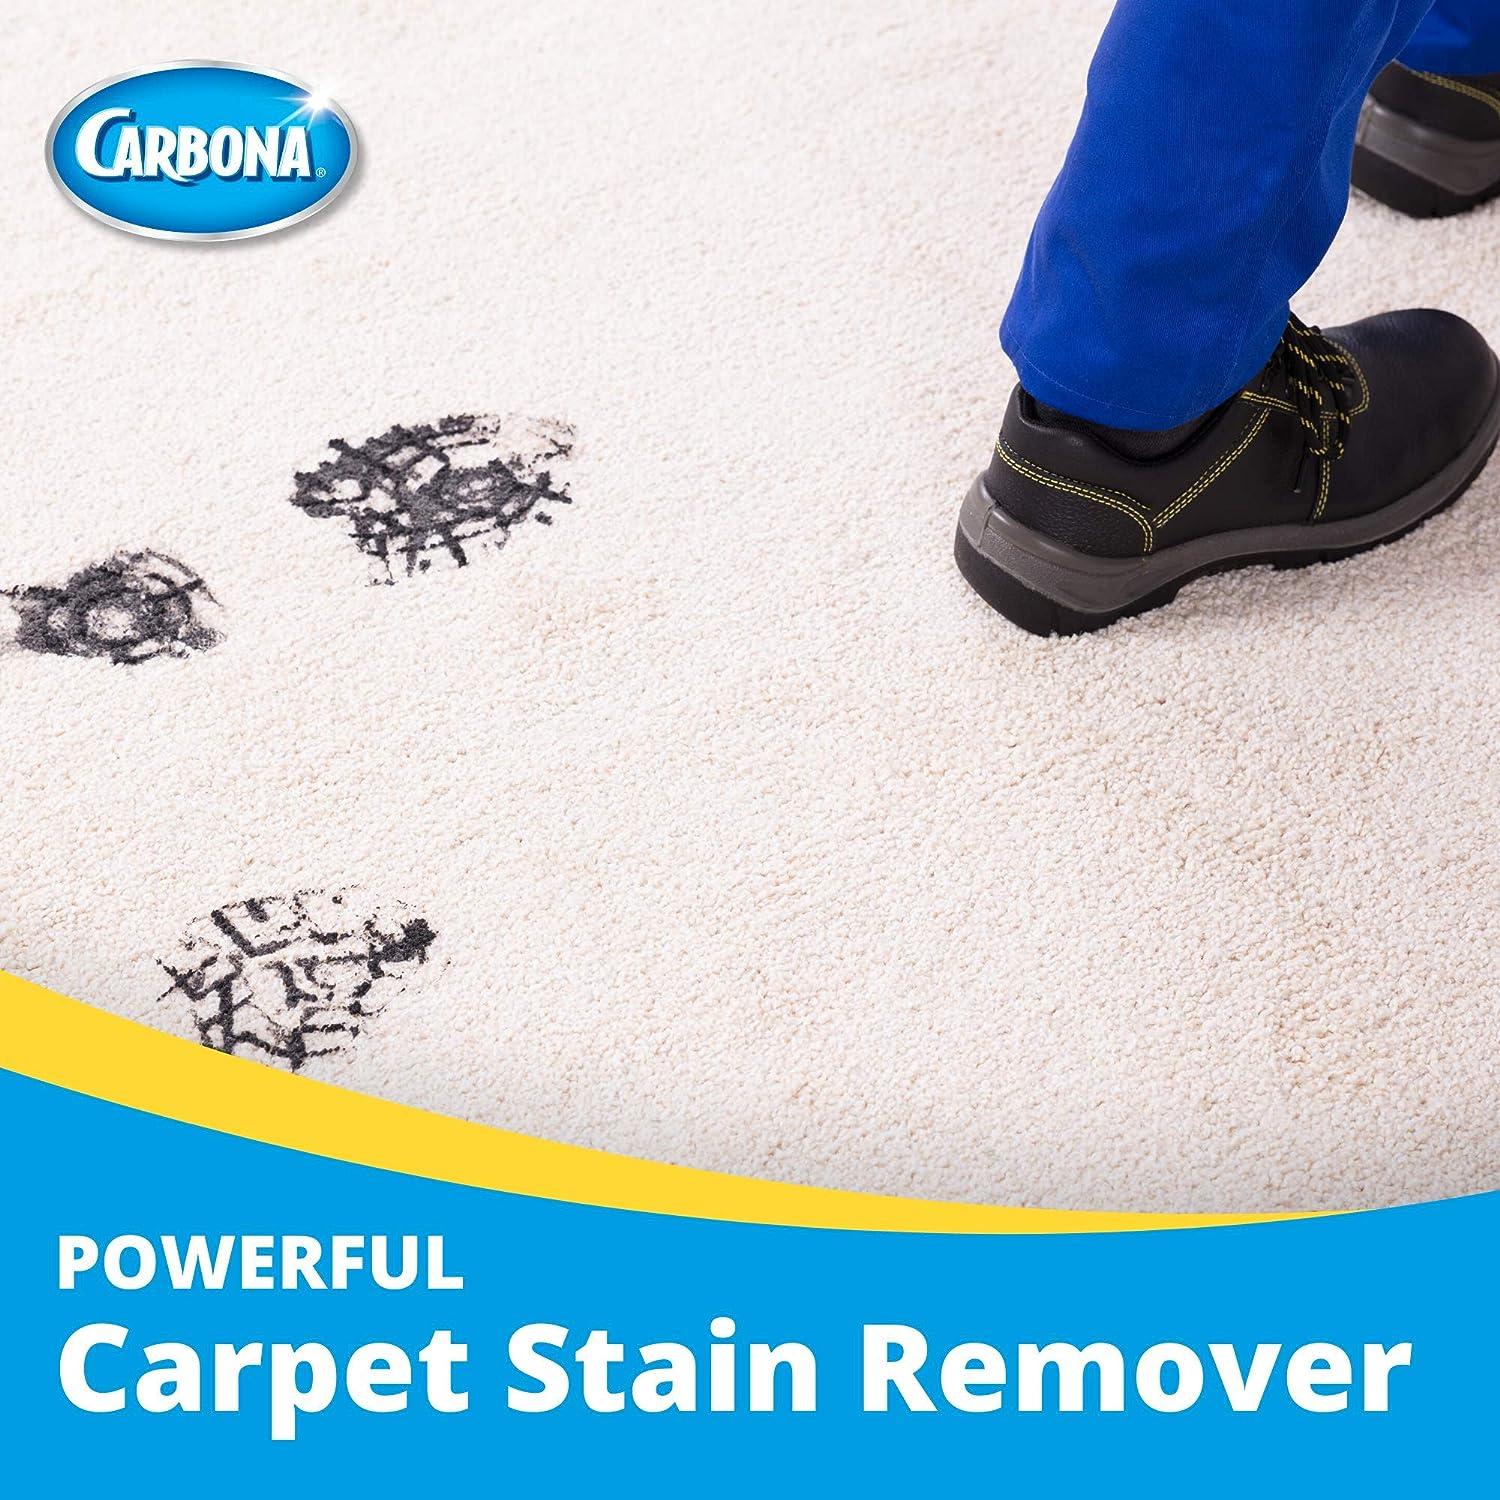 Carbona 2-in-1 Oxy Powered Carpet Cleaner